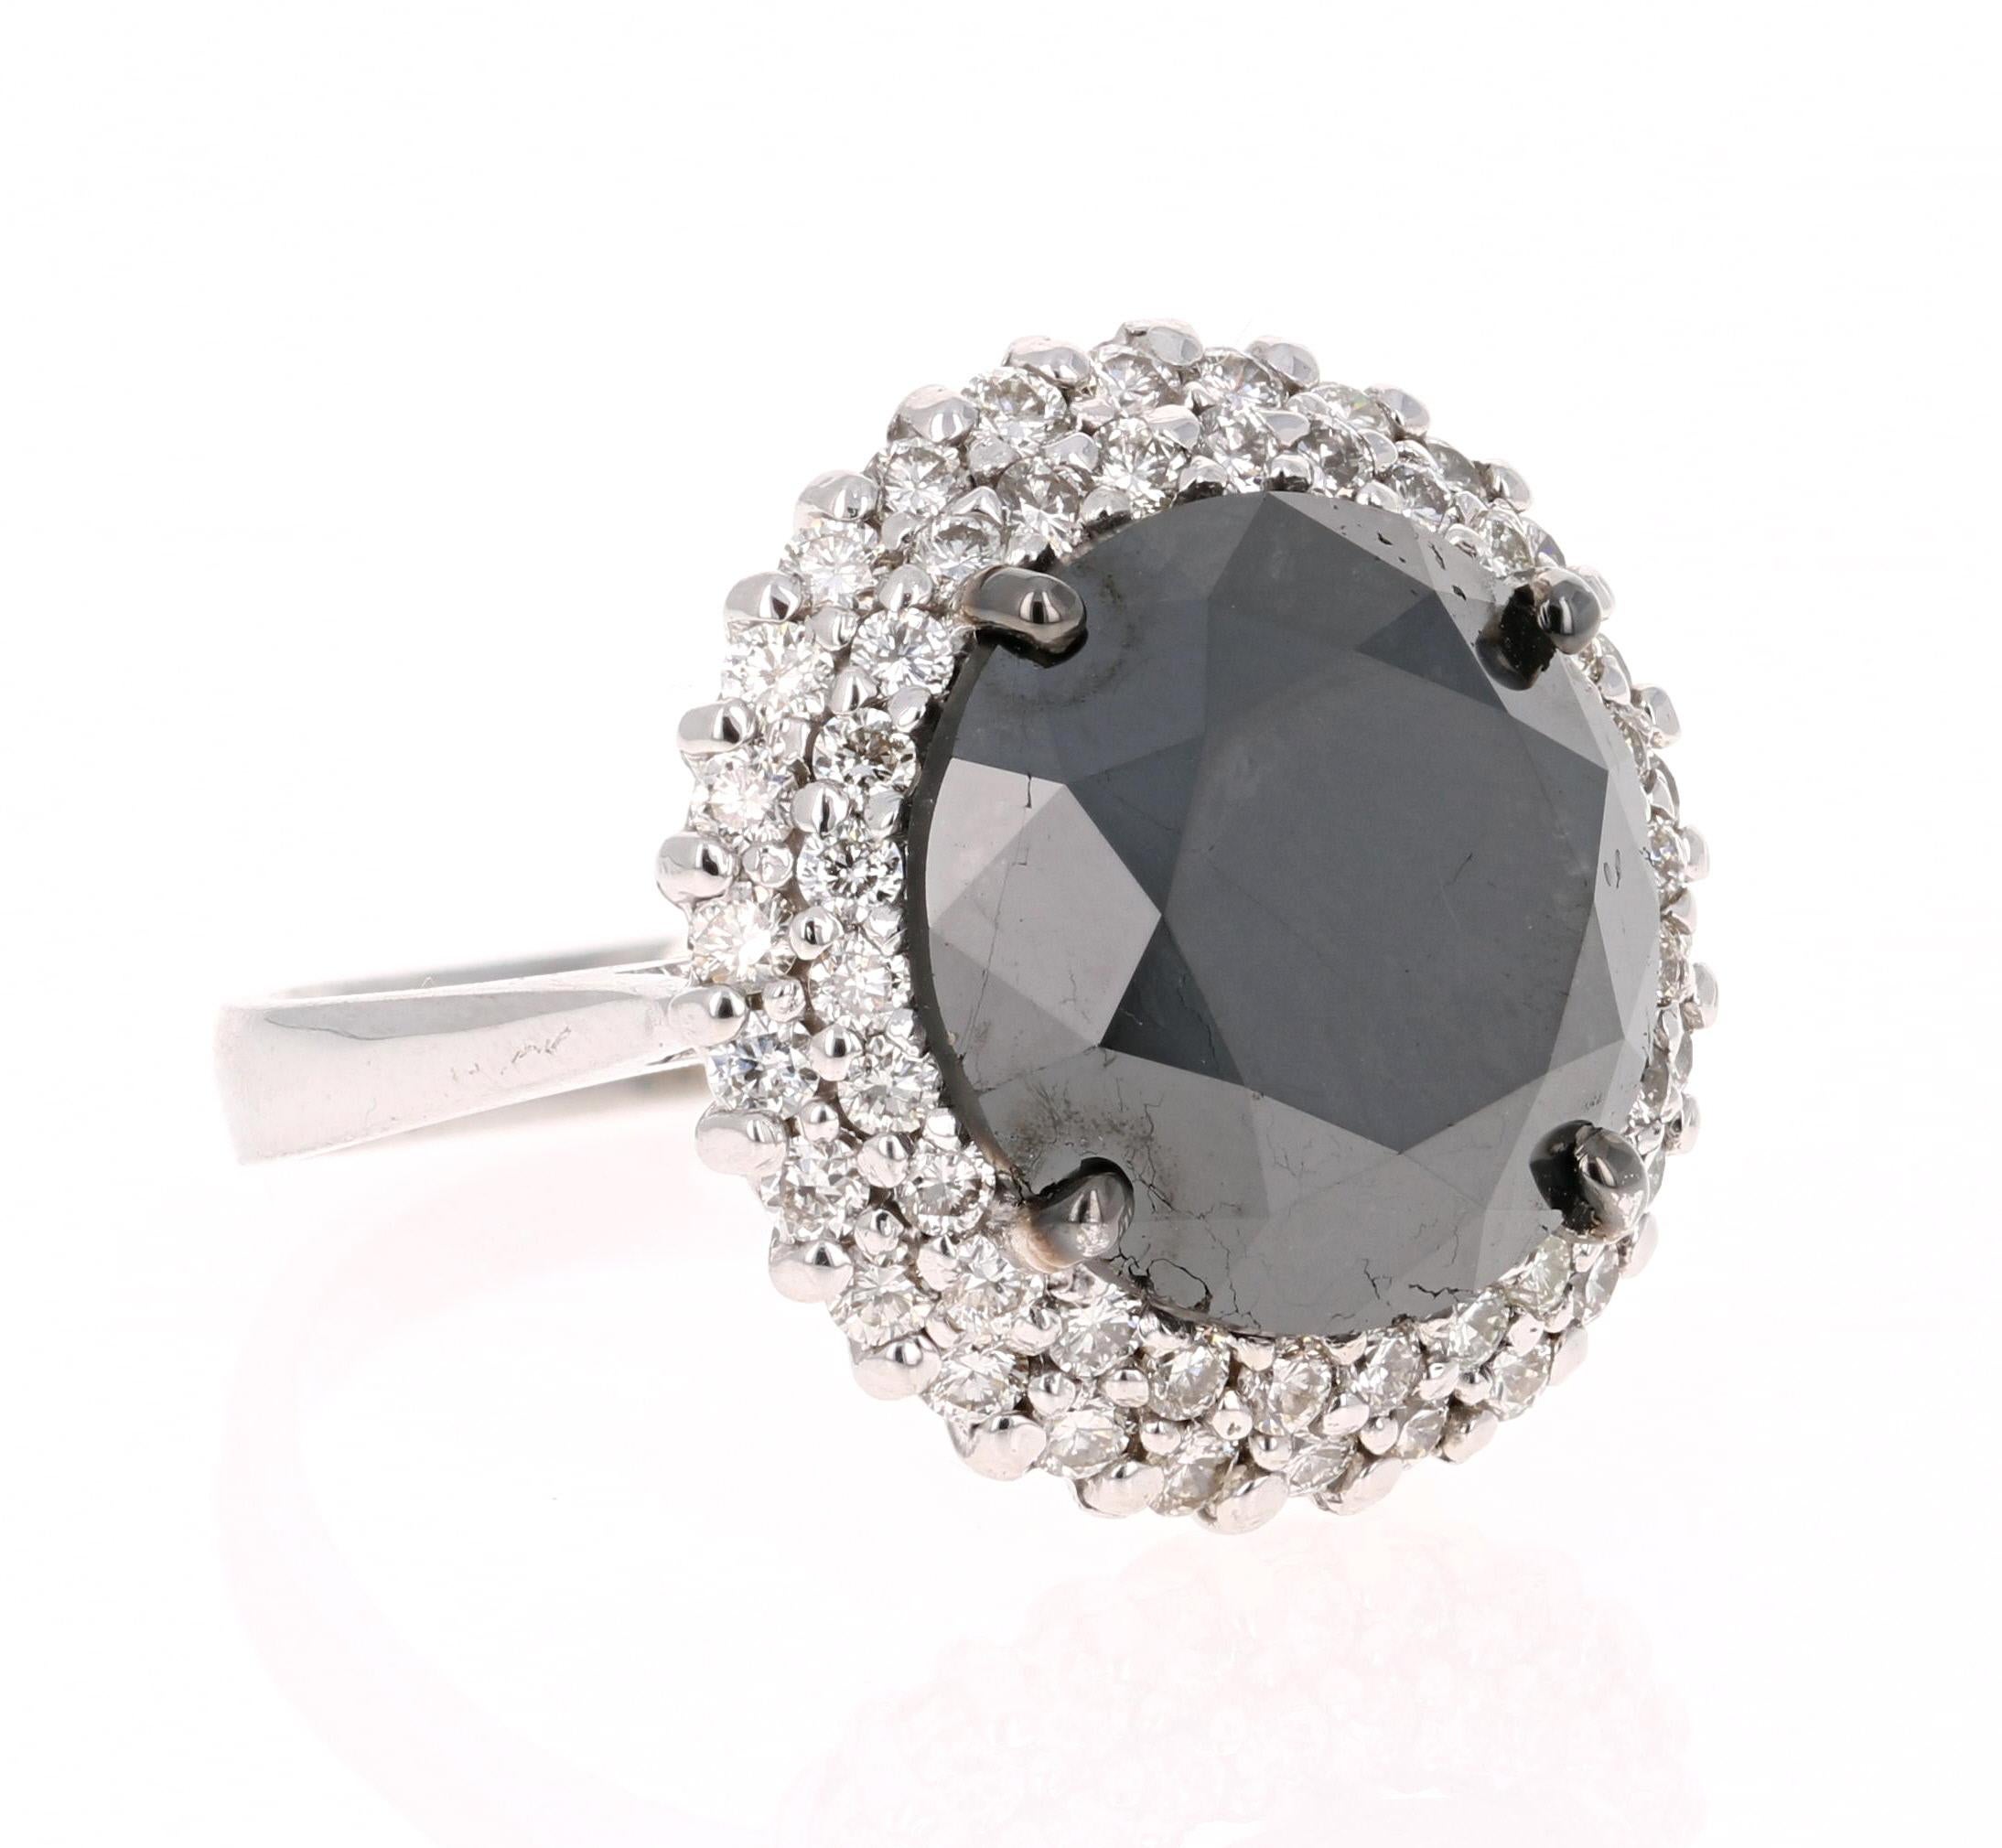 Stunning Black and White Diamond Cocktail Ring that is a nothing but a Statement! 

The Round Cut Black Diamond is 10.06 Carats and is surrounded by a double halo of 51 Round Cut Diamonds weighing 1.00 Carat. (Clarity: VS, Color: H) The total carat